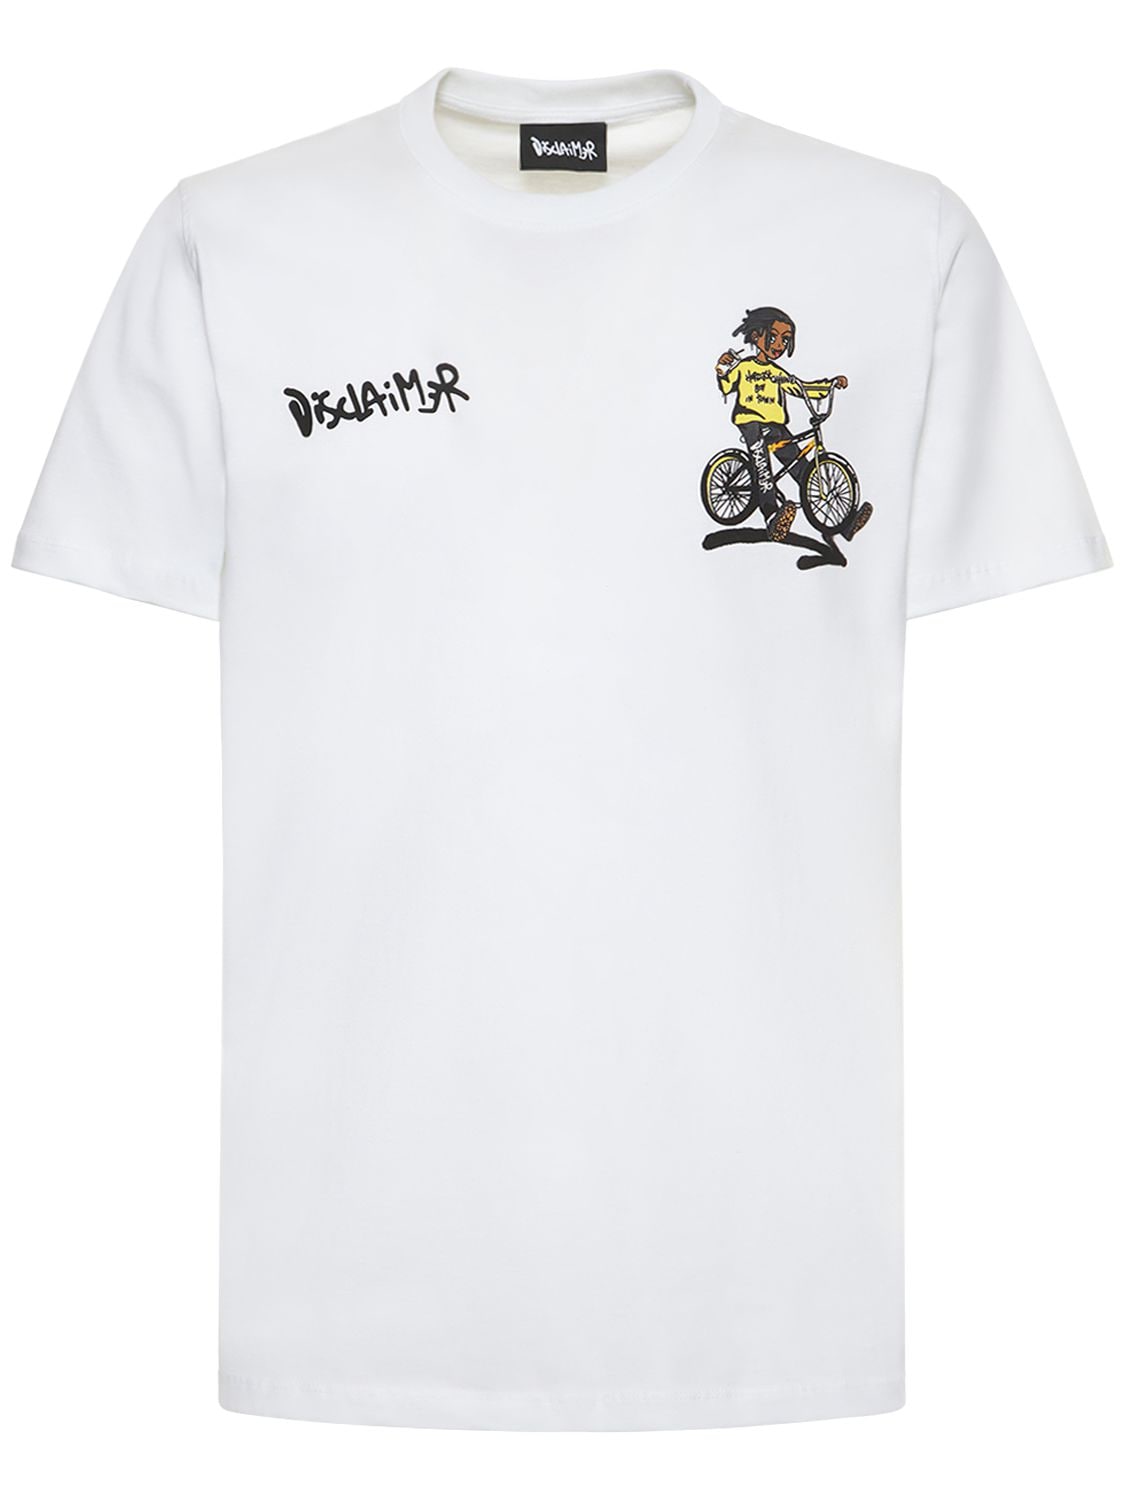 Disclaimer Hardest Boy In Town Cotton T-shirt In White